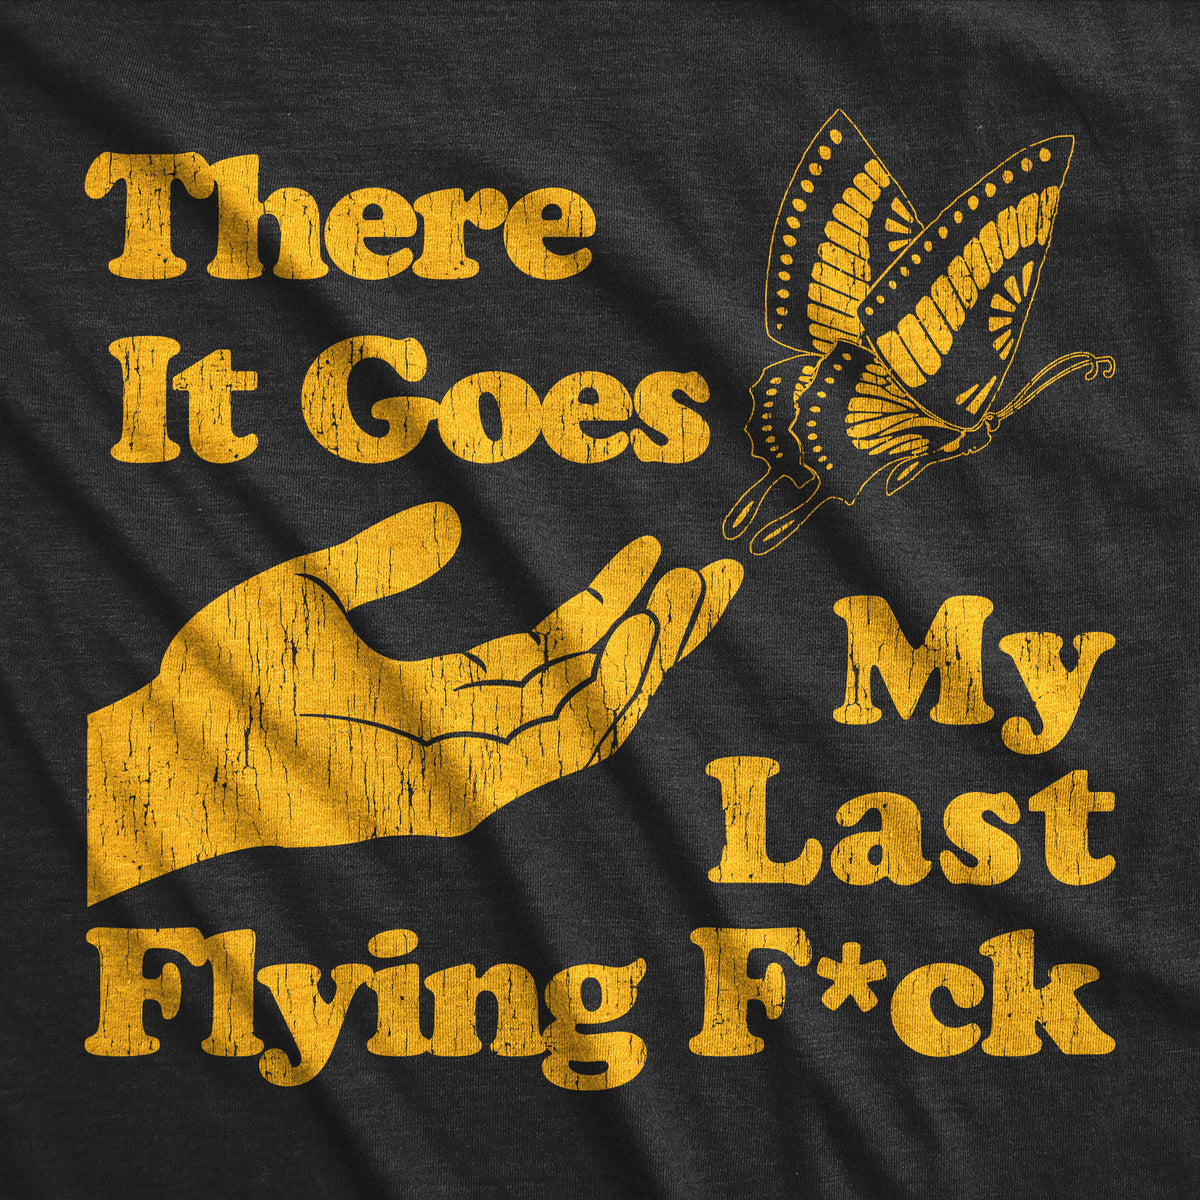 There Goes My Last Flying Fuck Men&#39;s T Shirt